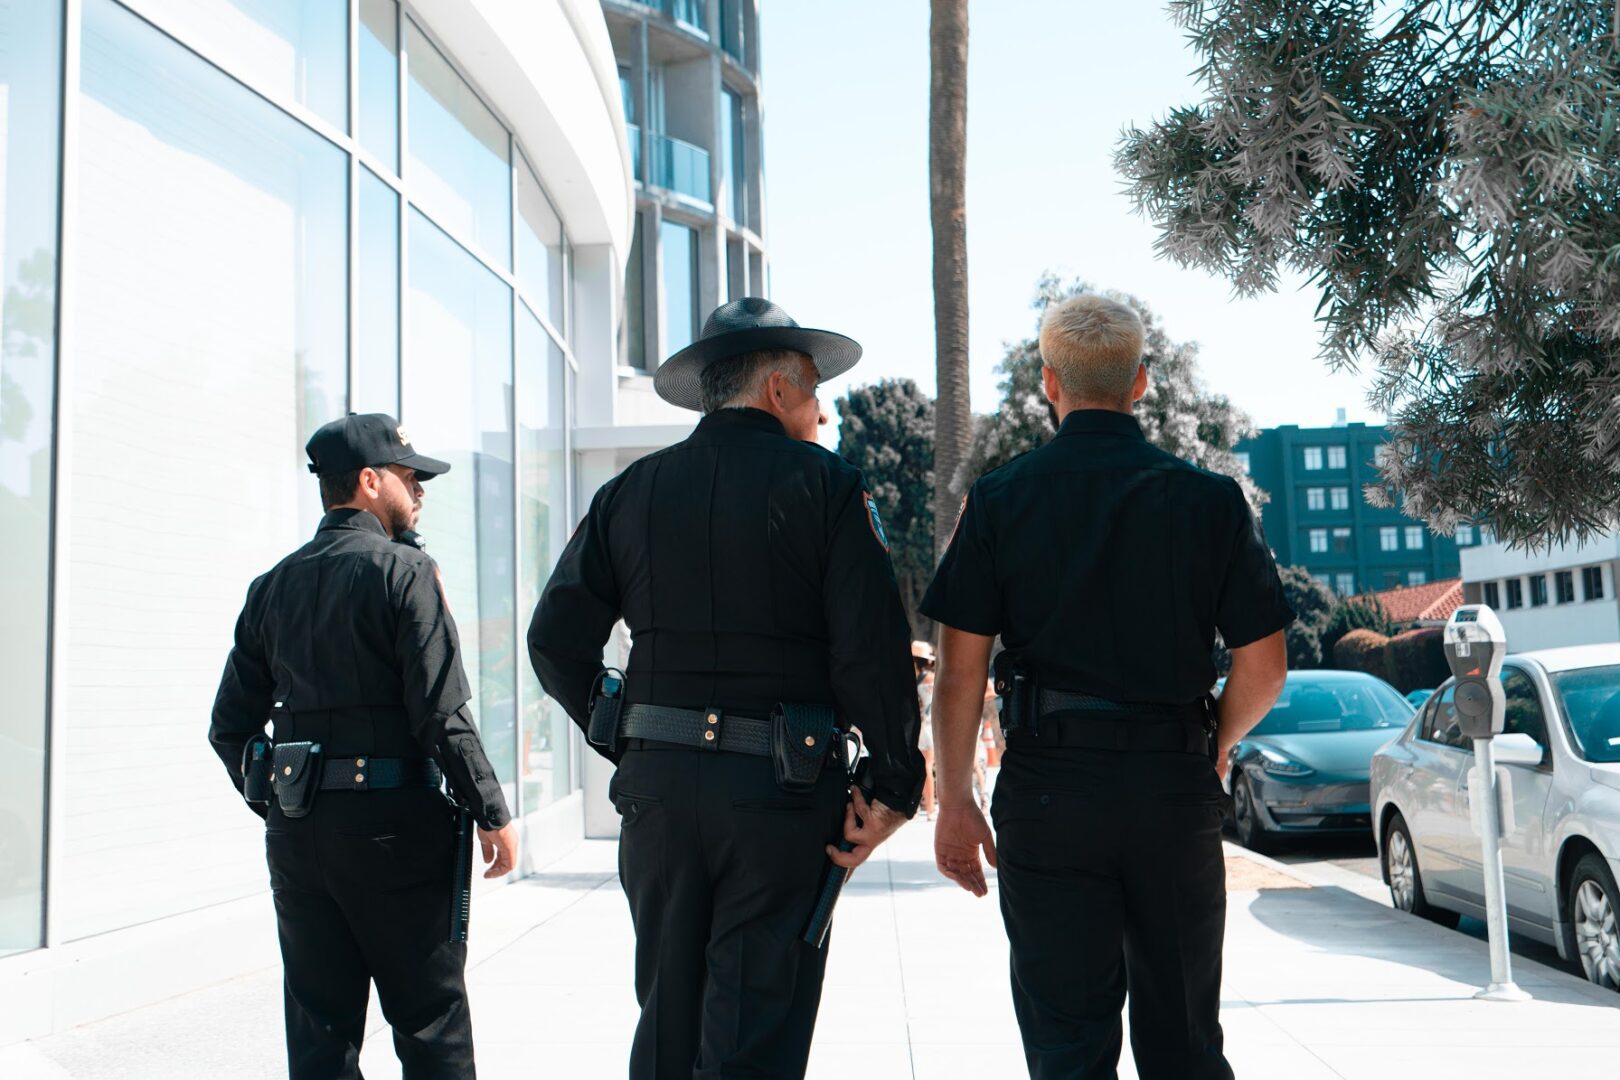 Three police officers standing on a sidewalk near a building.